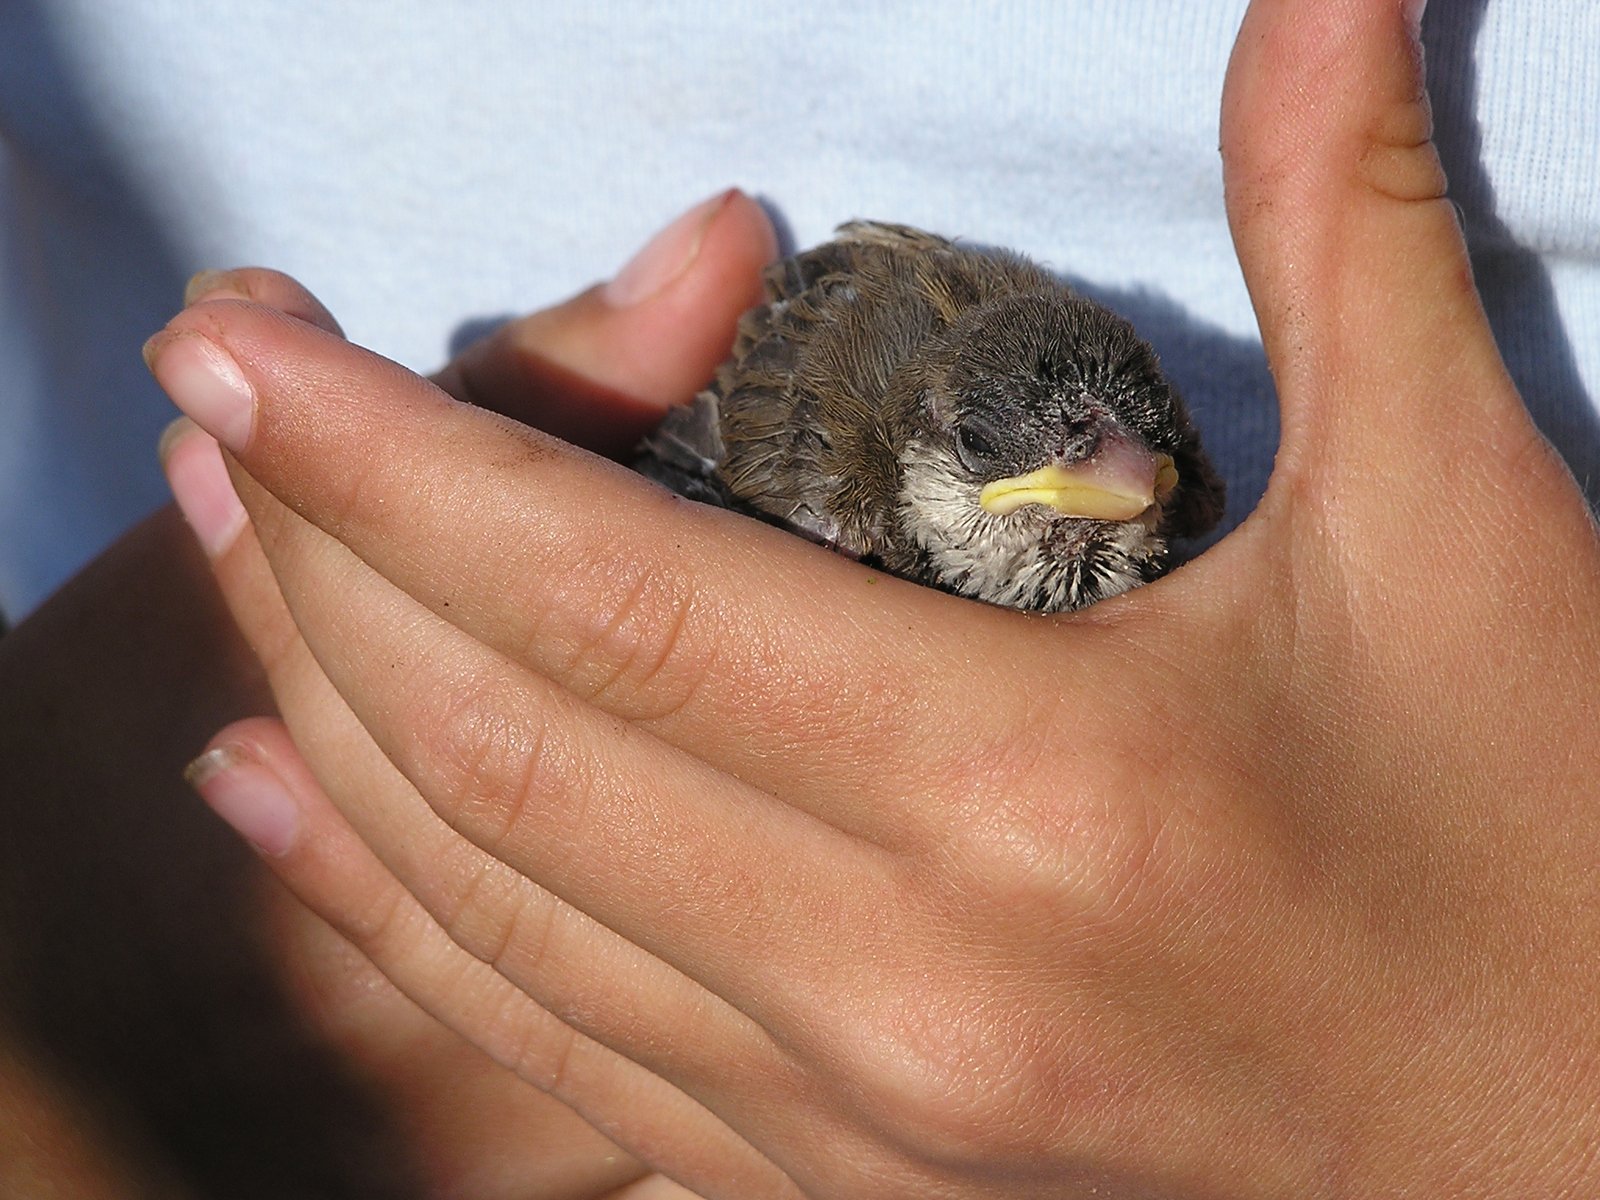 a little bird that is in someone's hands